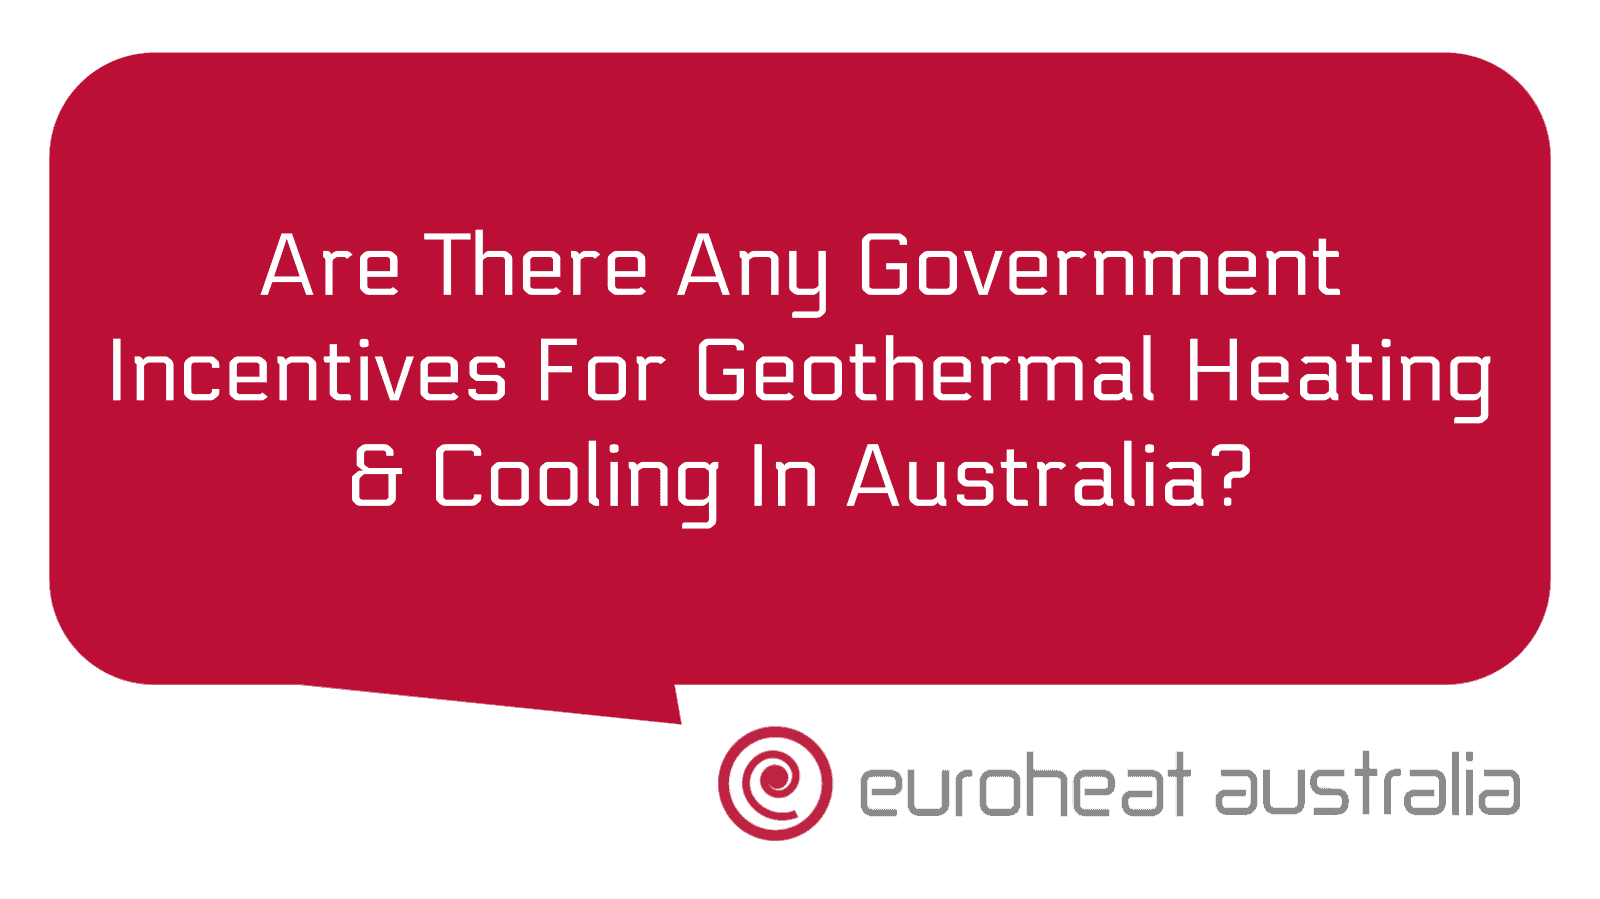 are-there-any-government-incentives-for-geothermal-heating-cooling-in